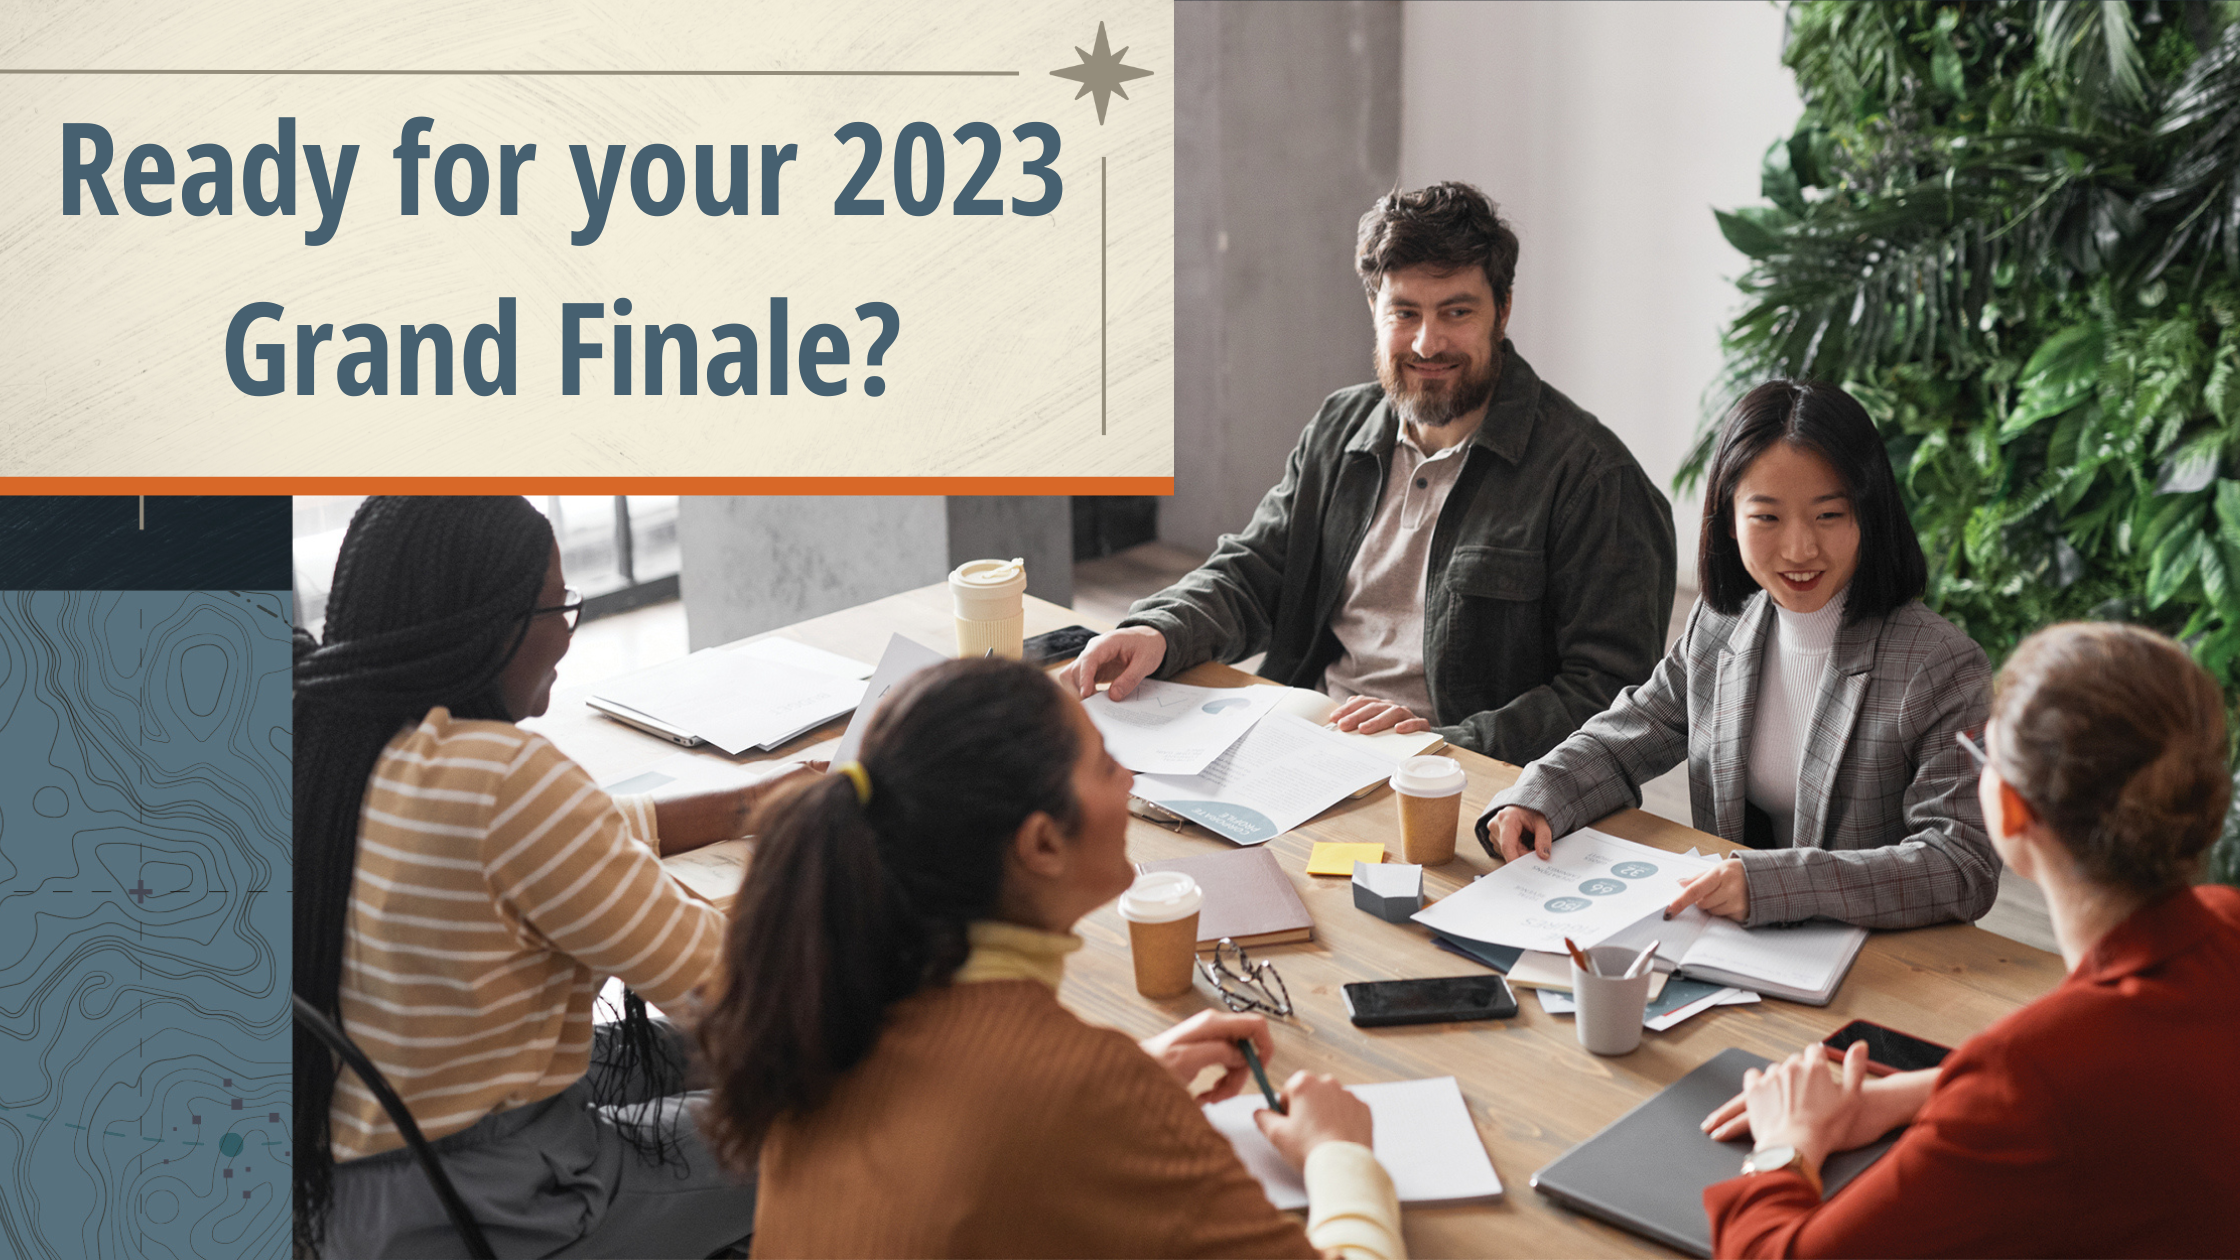 CPG Founders, are you losing sleep over current challenges or making plans for an explosive 2023 Grand Finale?